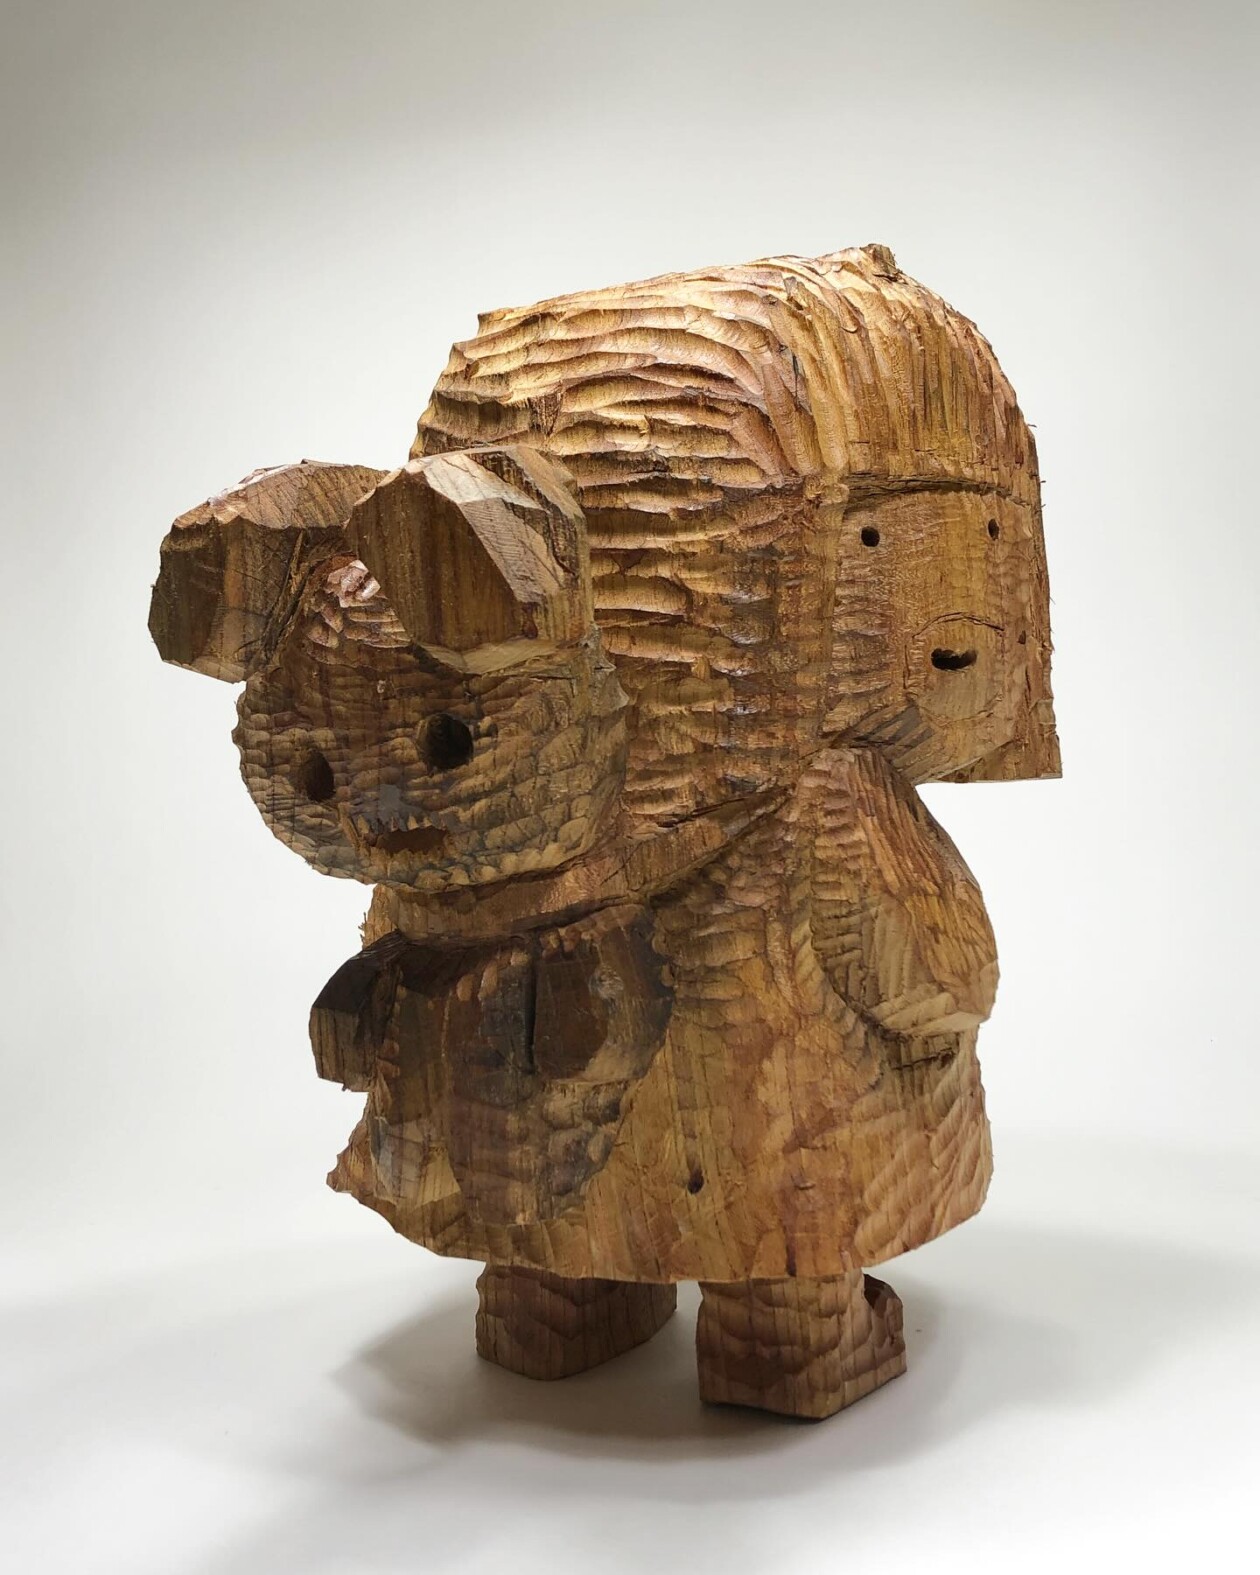 The Enchanting World Of Hirosuke Yabe's Wooden Beings (12)